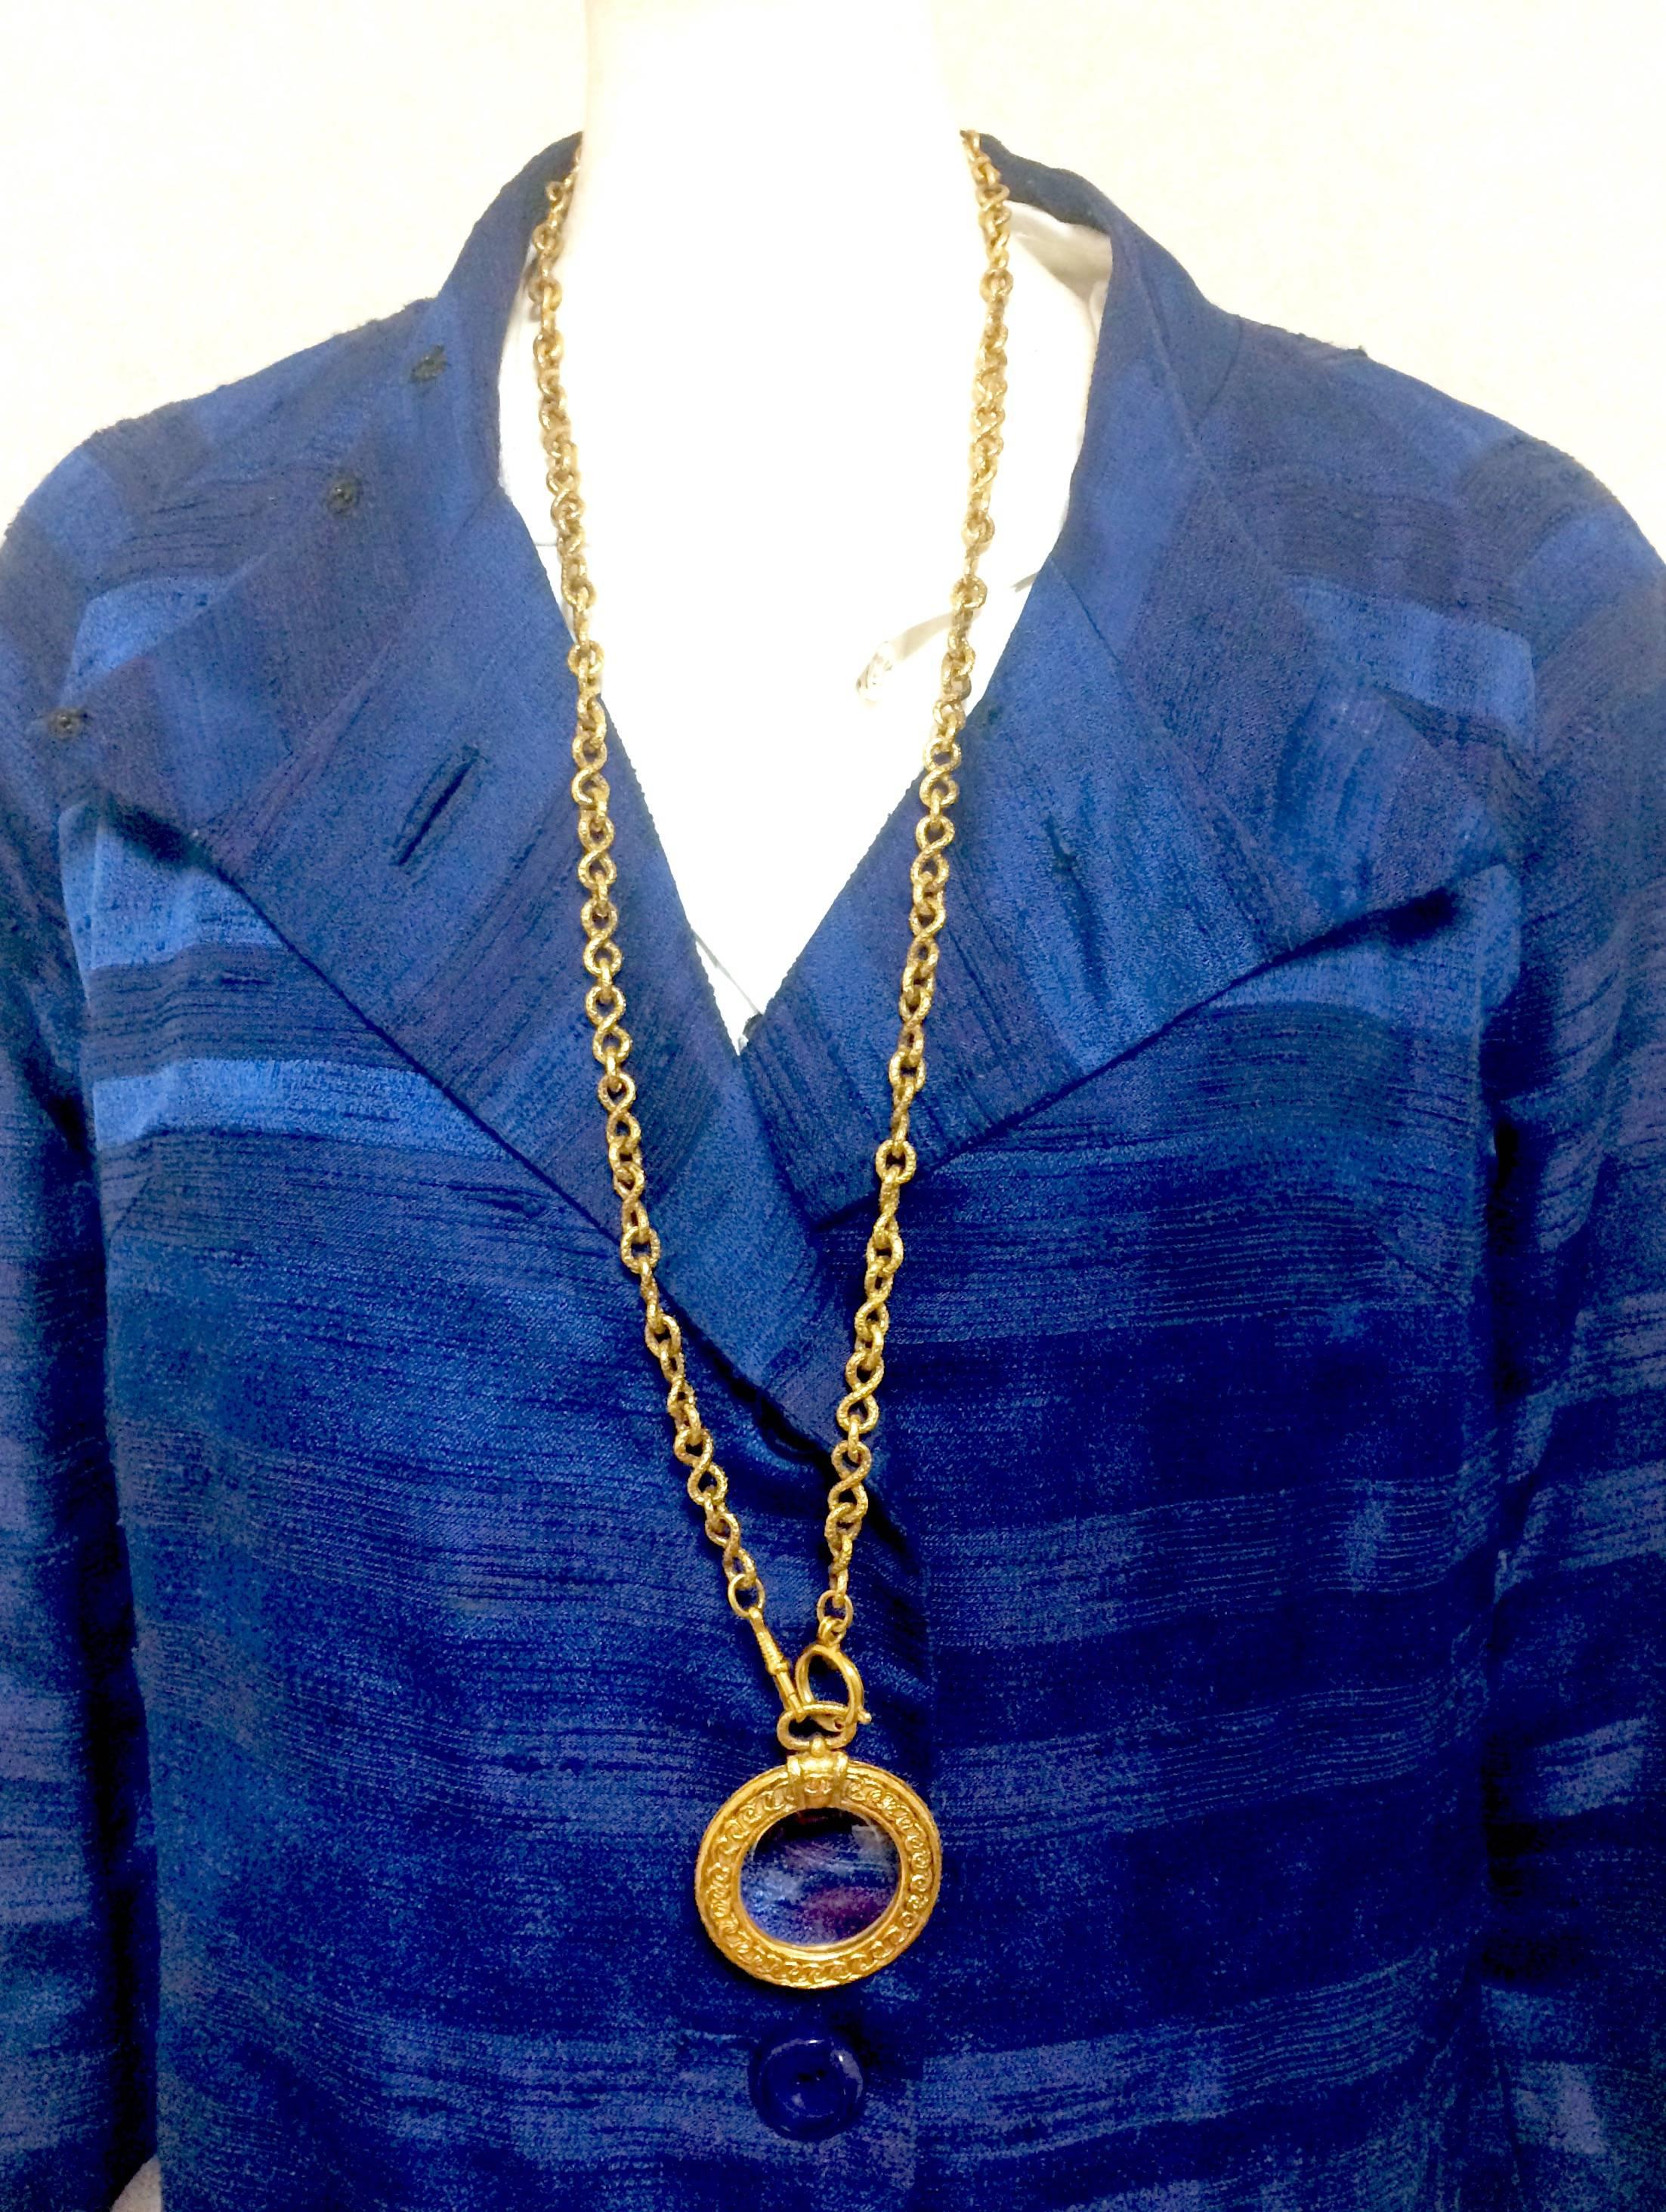 90s. Vintage CHANEL long chain necklace with round glass loupe pendant top and CC motif. Can be worn in double. Gorgeous masterpiece.

Introducing a vintage Chanel gorgeous long chain necklace.
Perfect vintage CHANEL gift. 

Featuring a large round